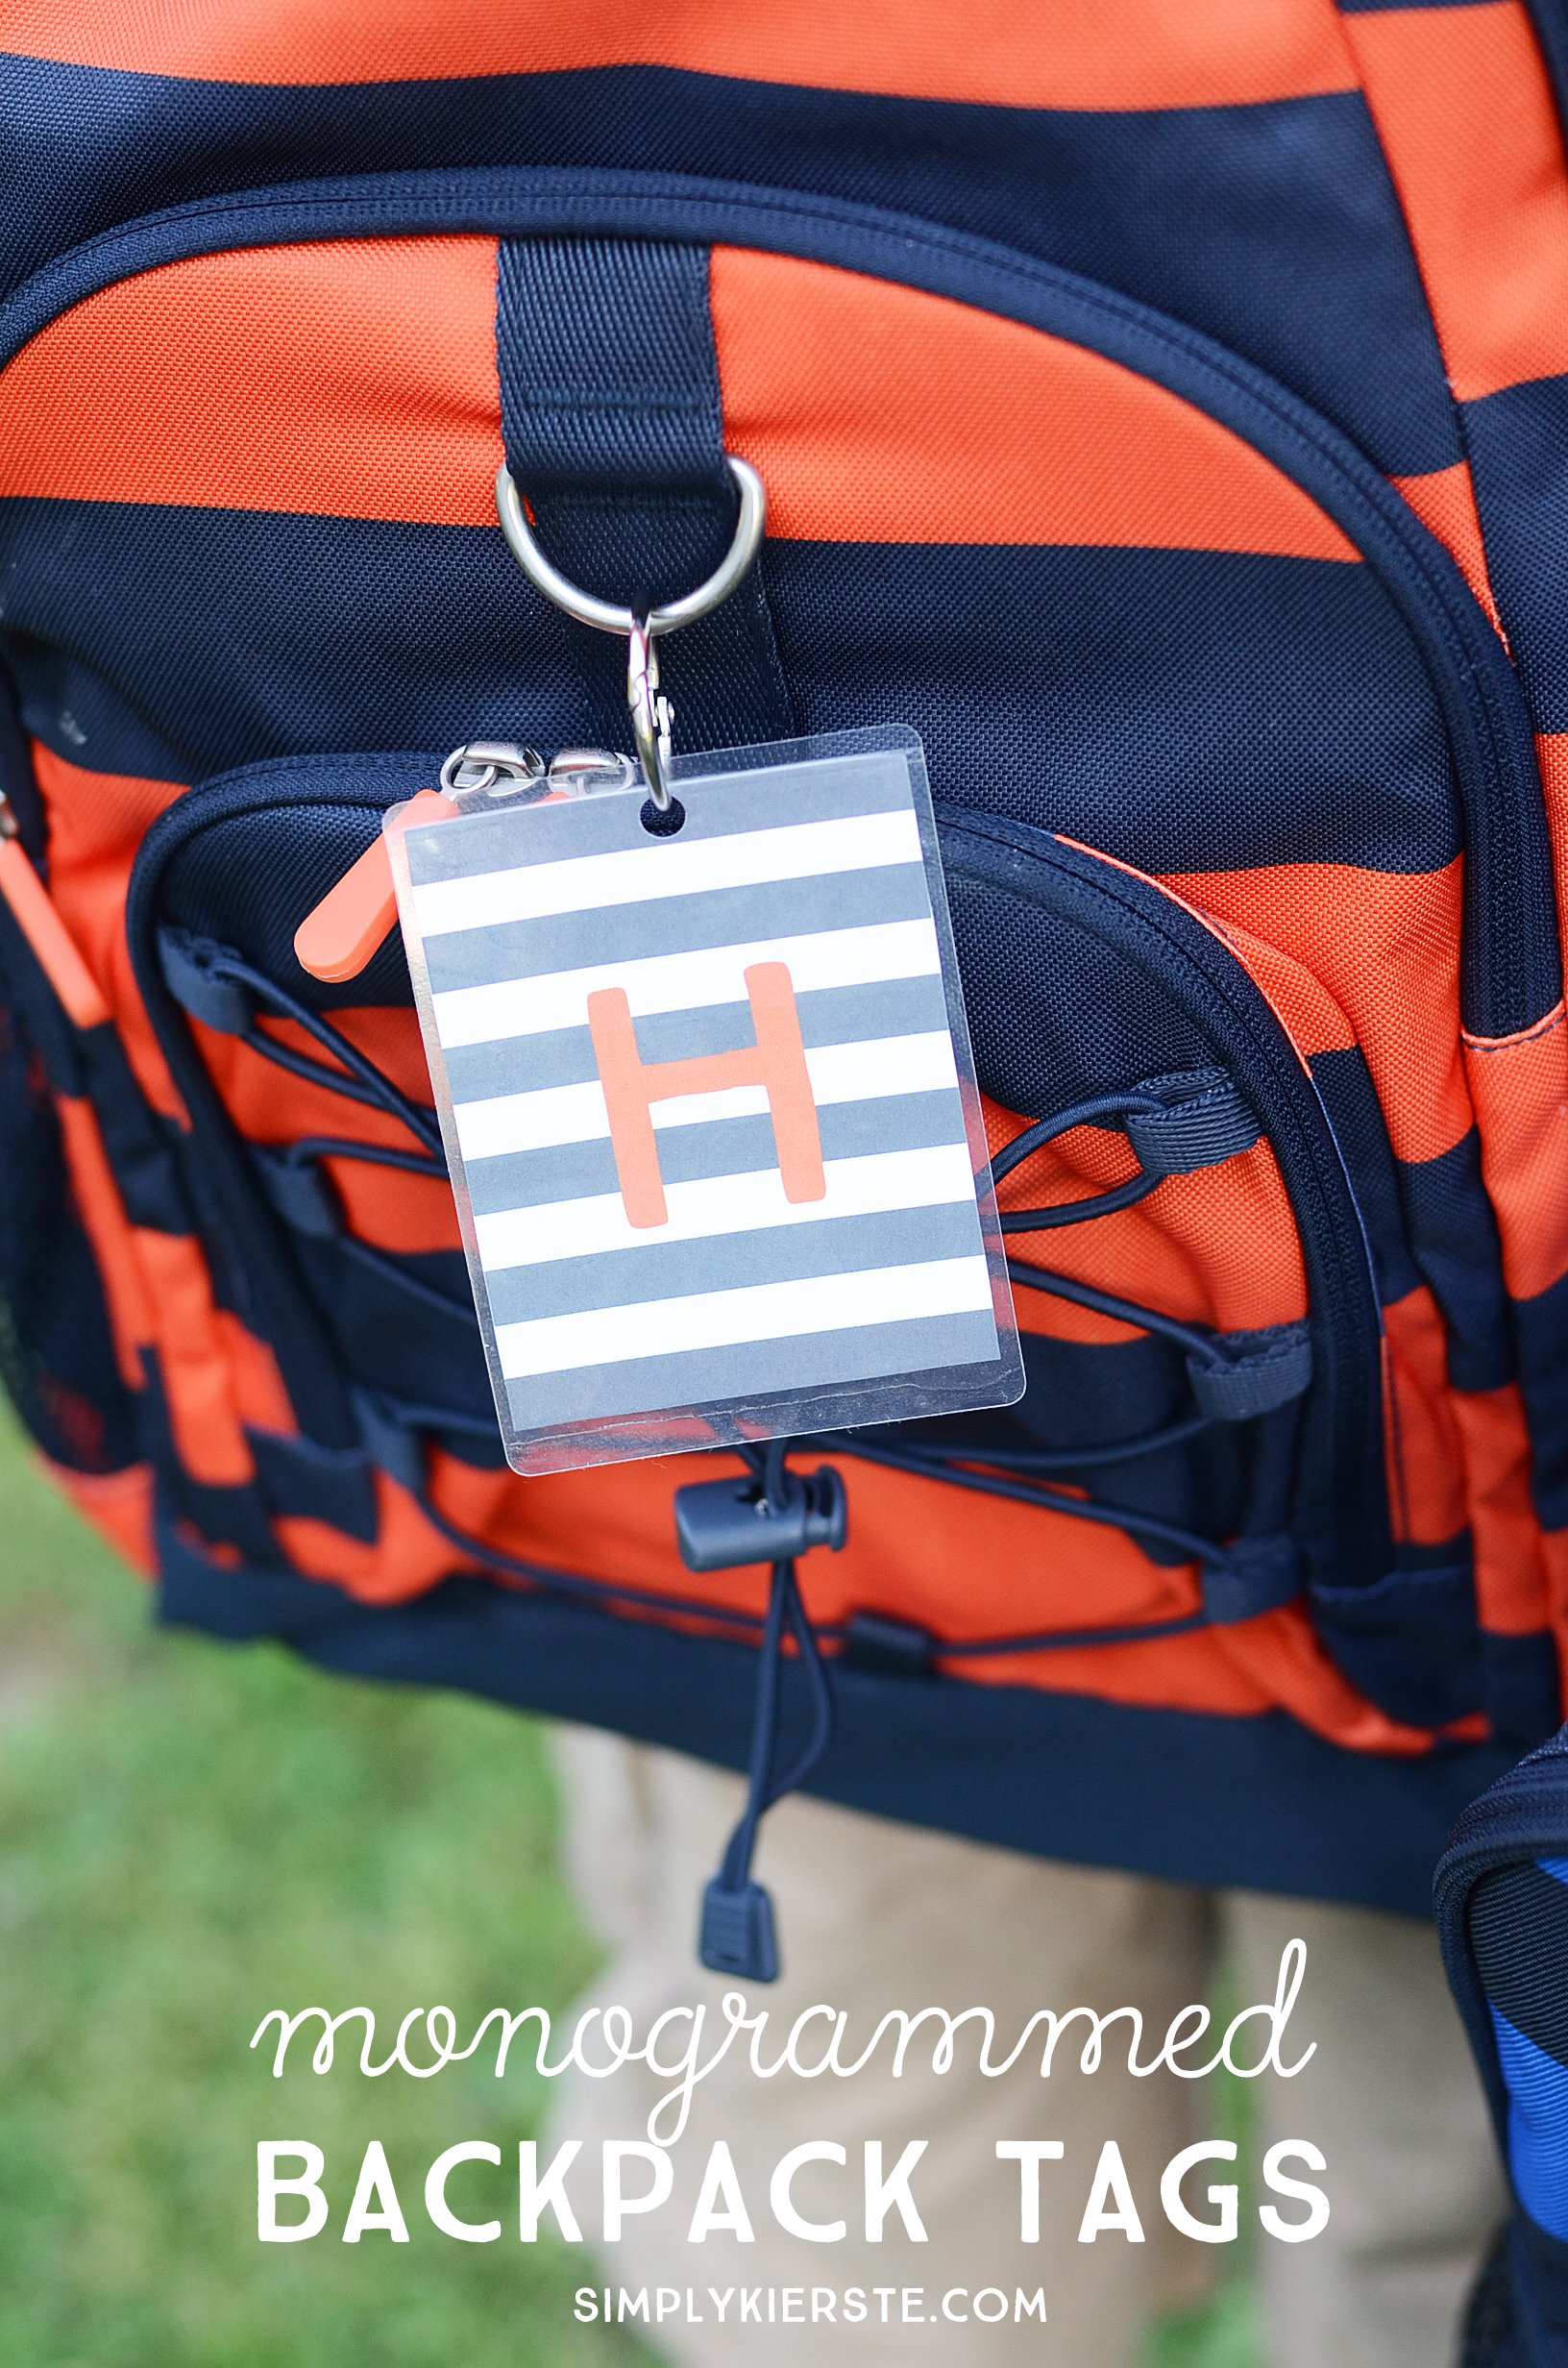 Monogrammed backpack tags